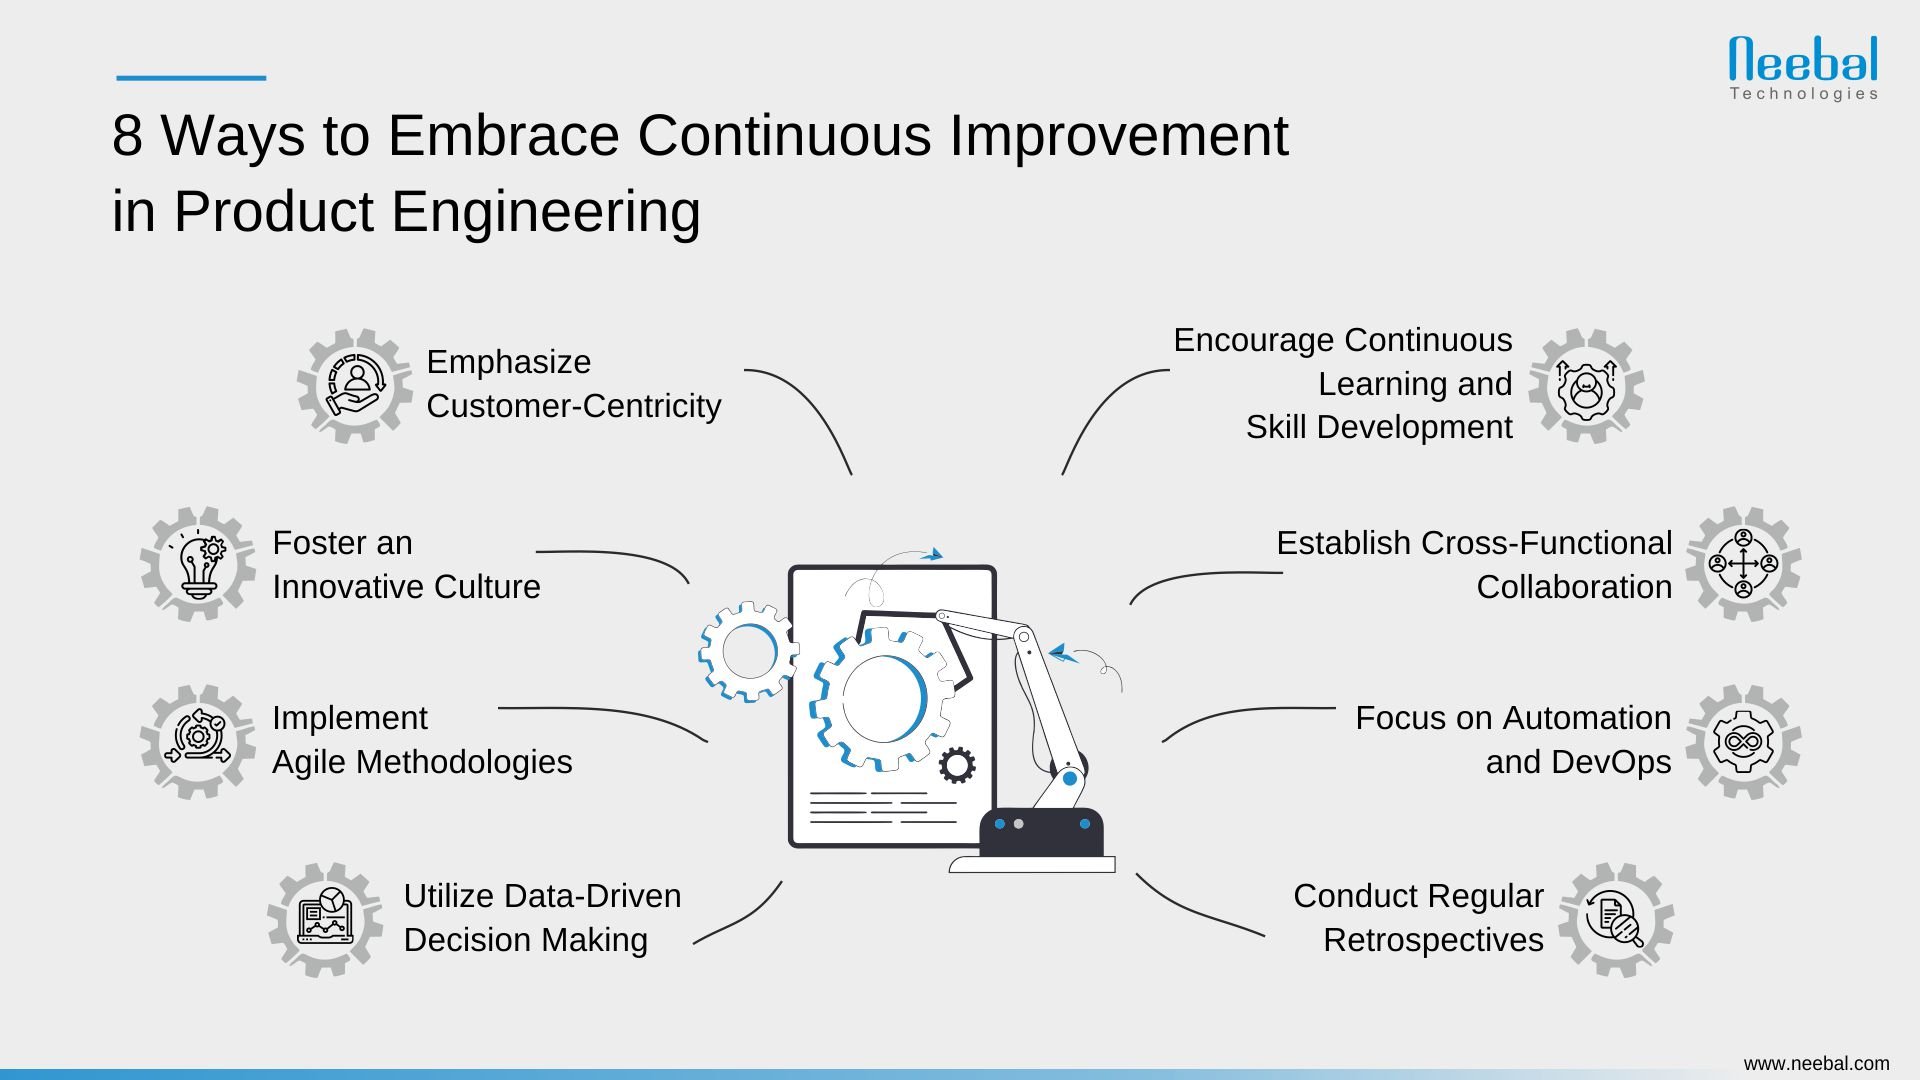 8 ways to embrace continuous improvement in product engineering - Infographic